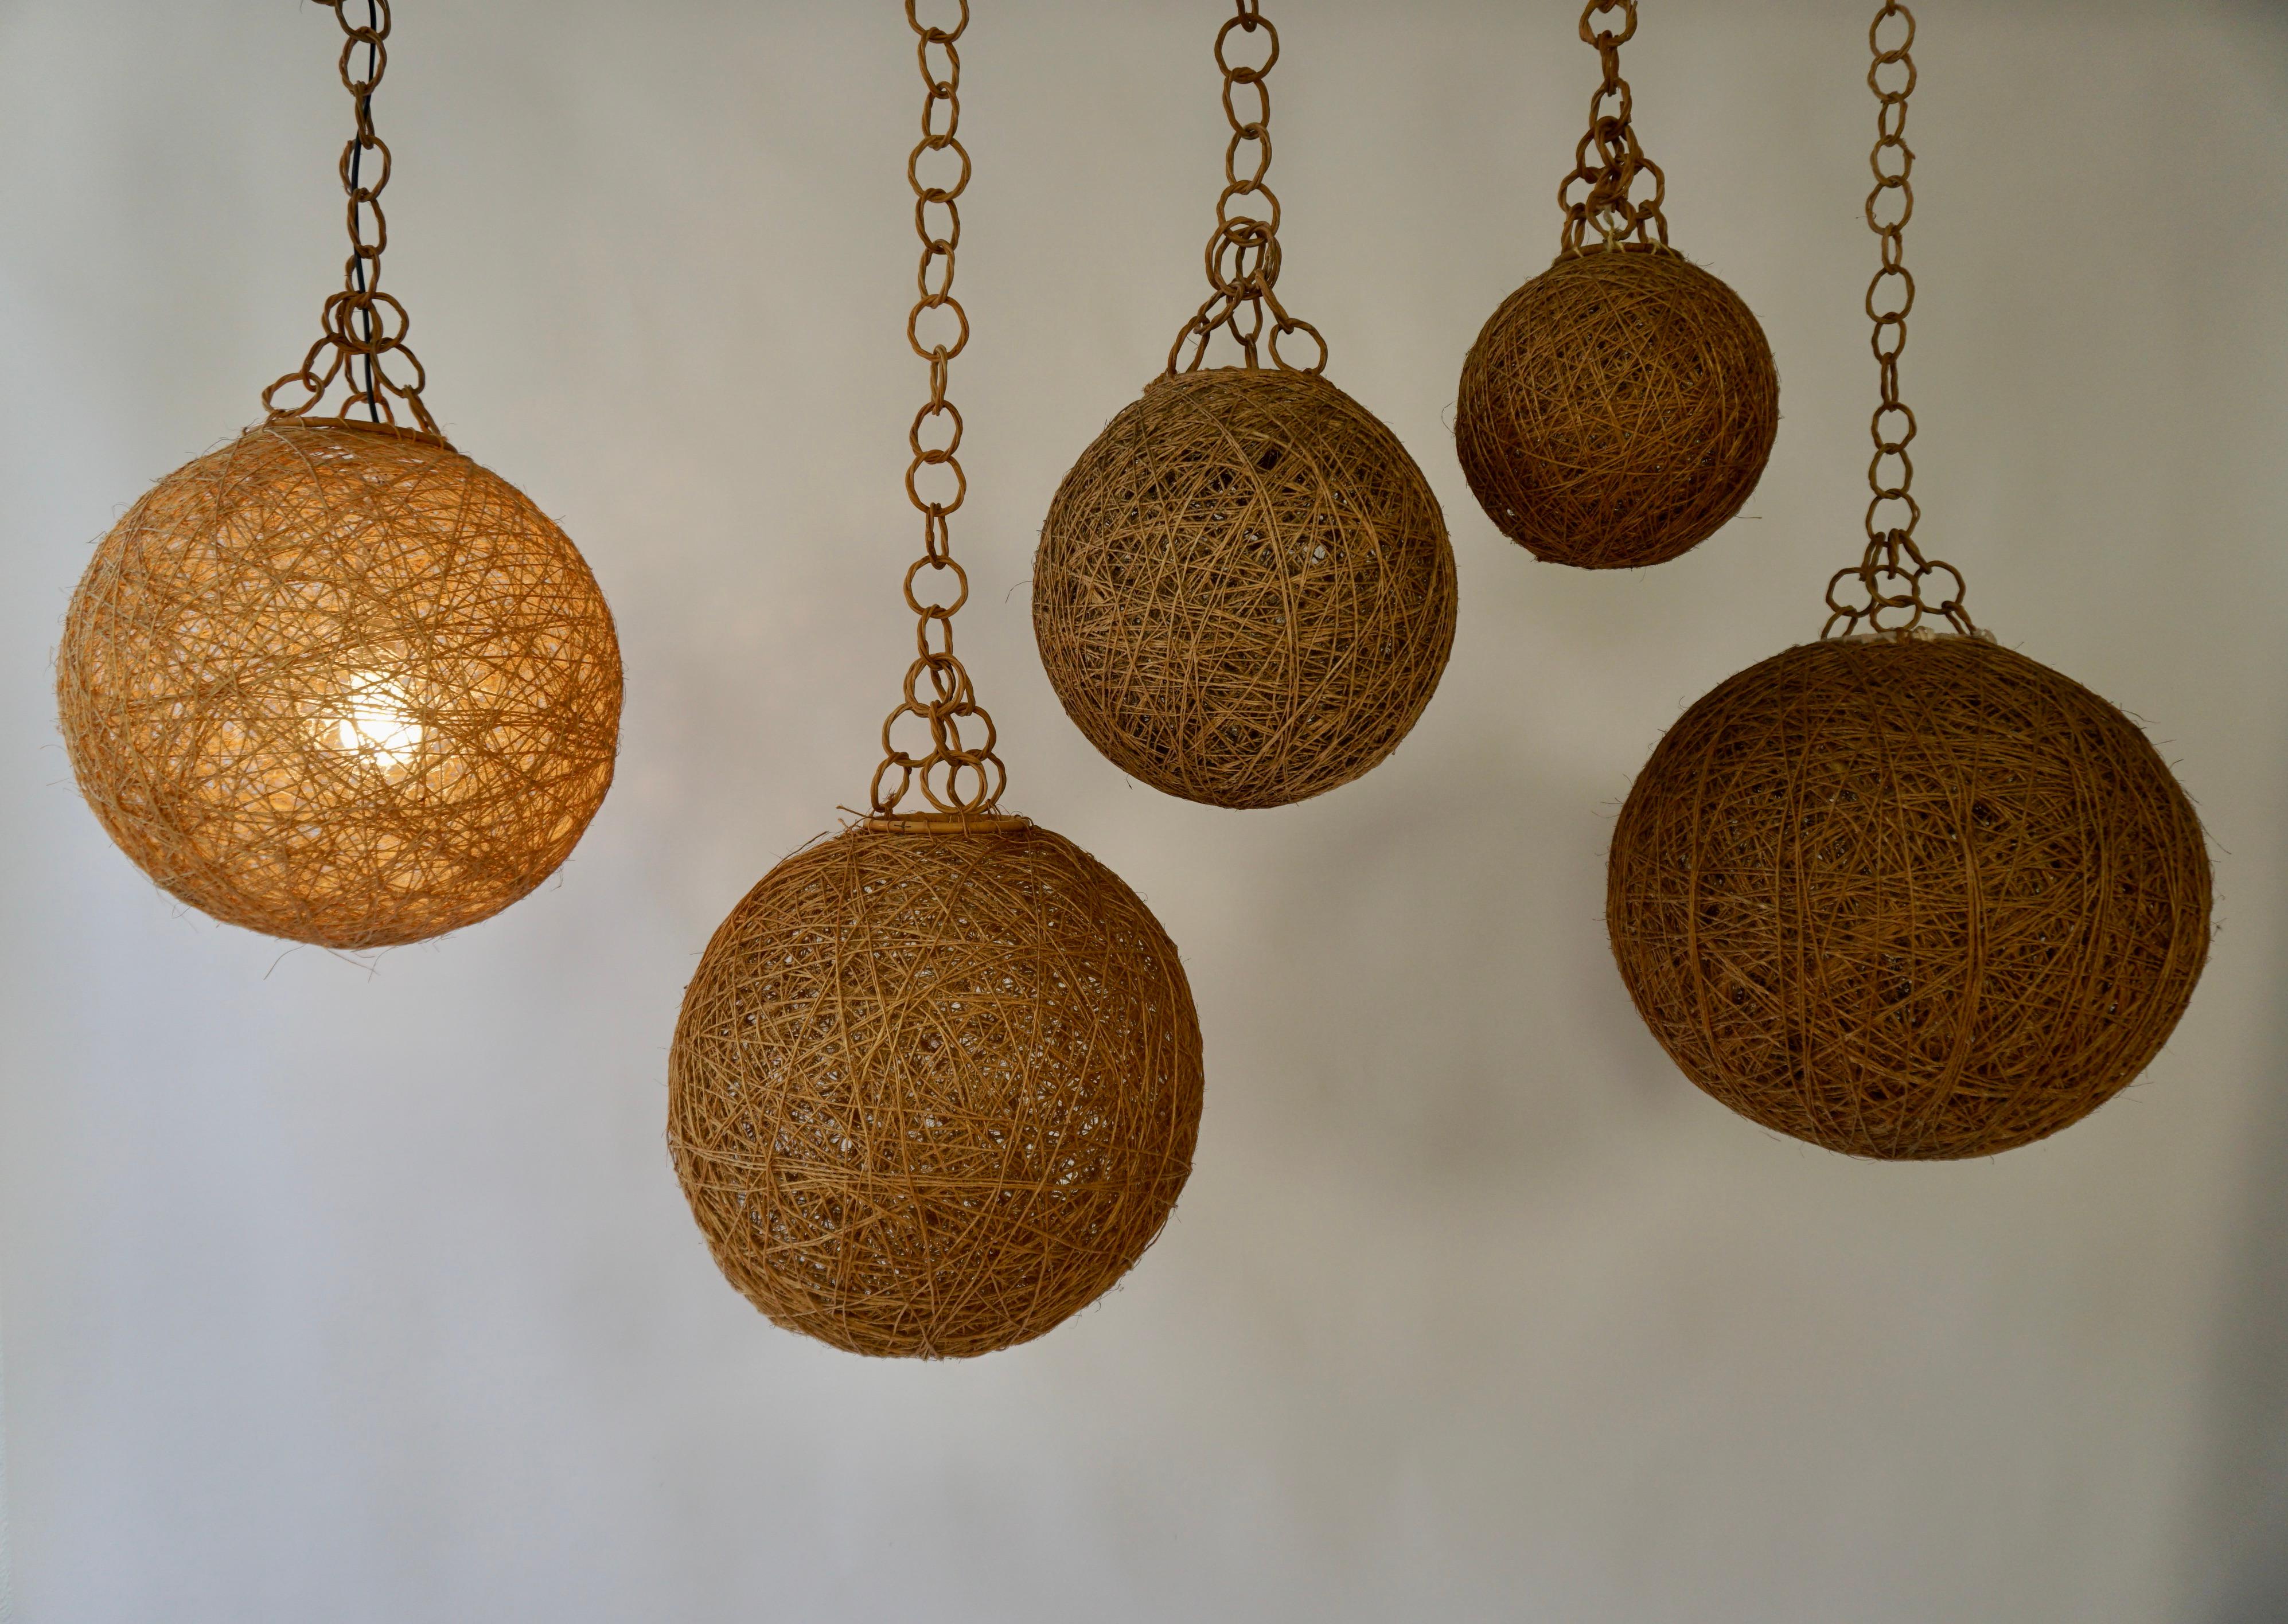 Five Danish hanging lamps made of twisted rope in a cream brown color.

Diameter;
2 x 15.7